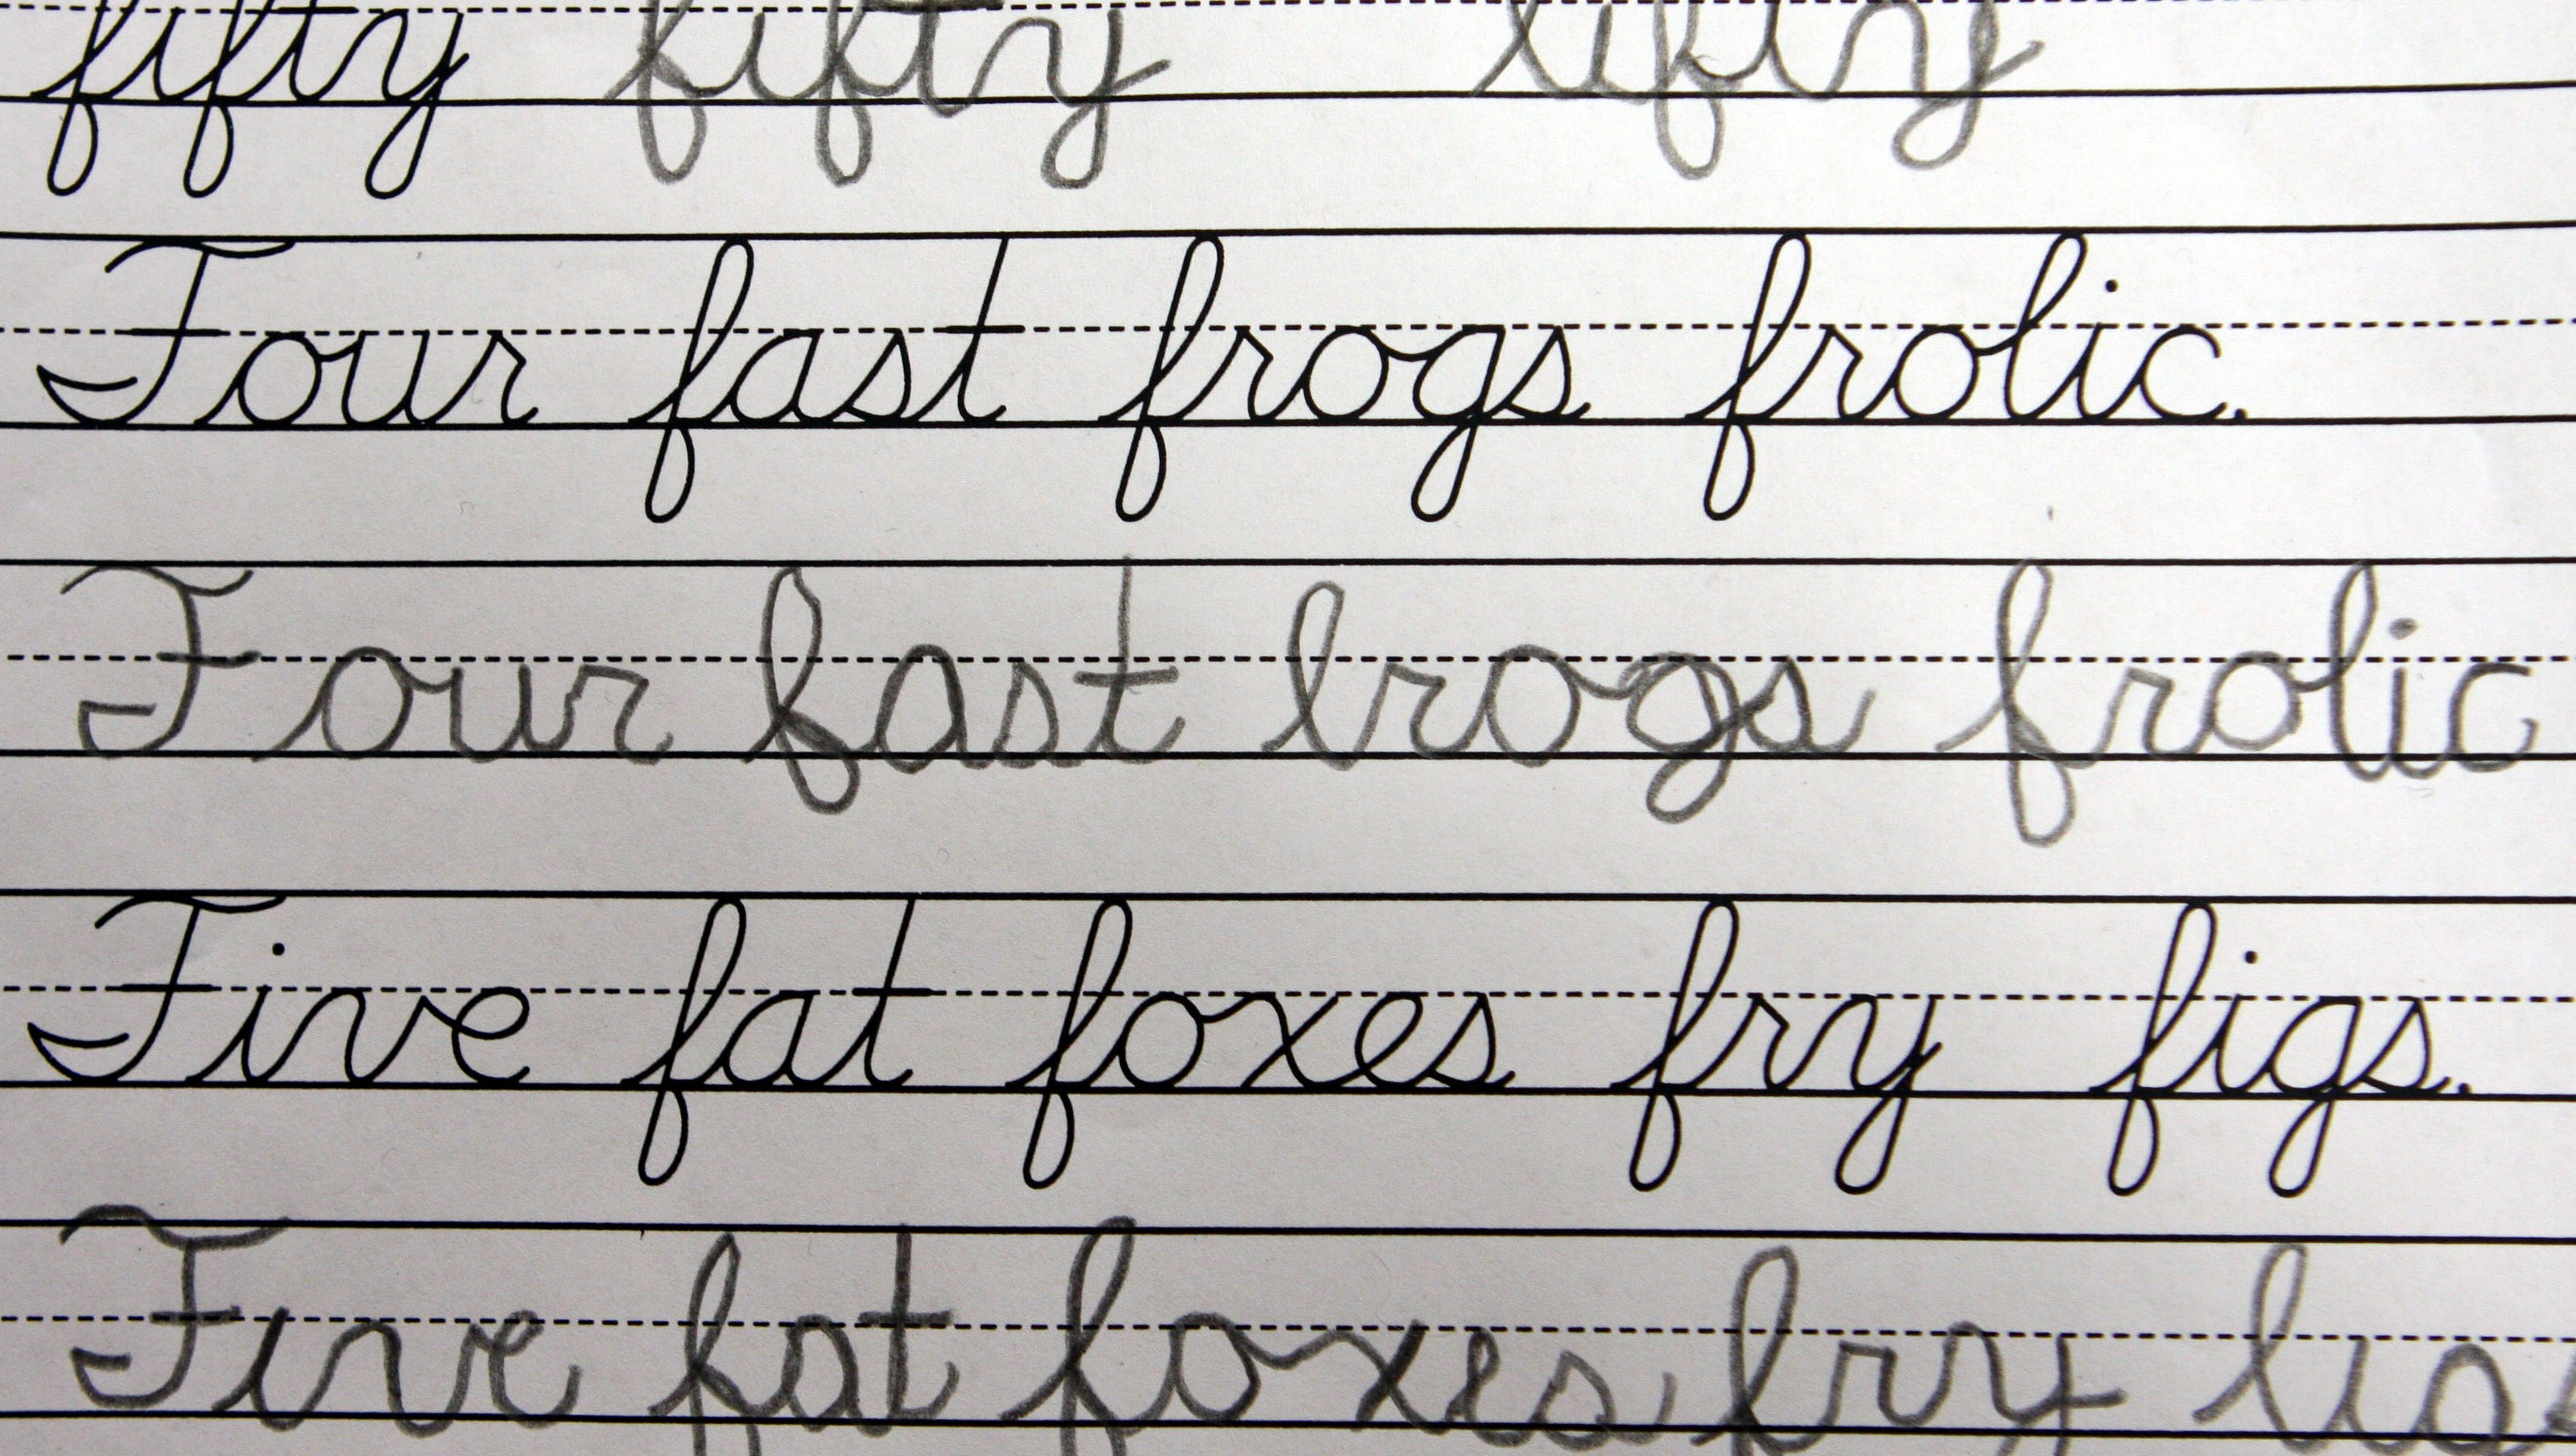 Students Should Still Learn Cursive Writing View